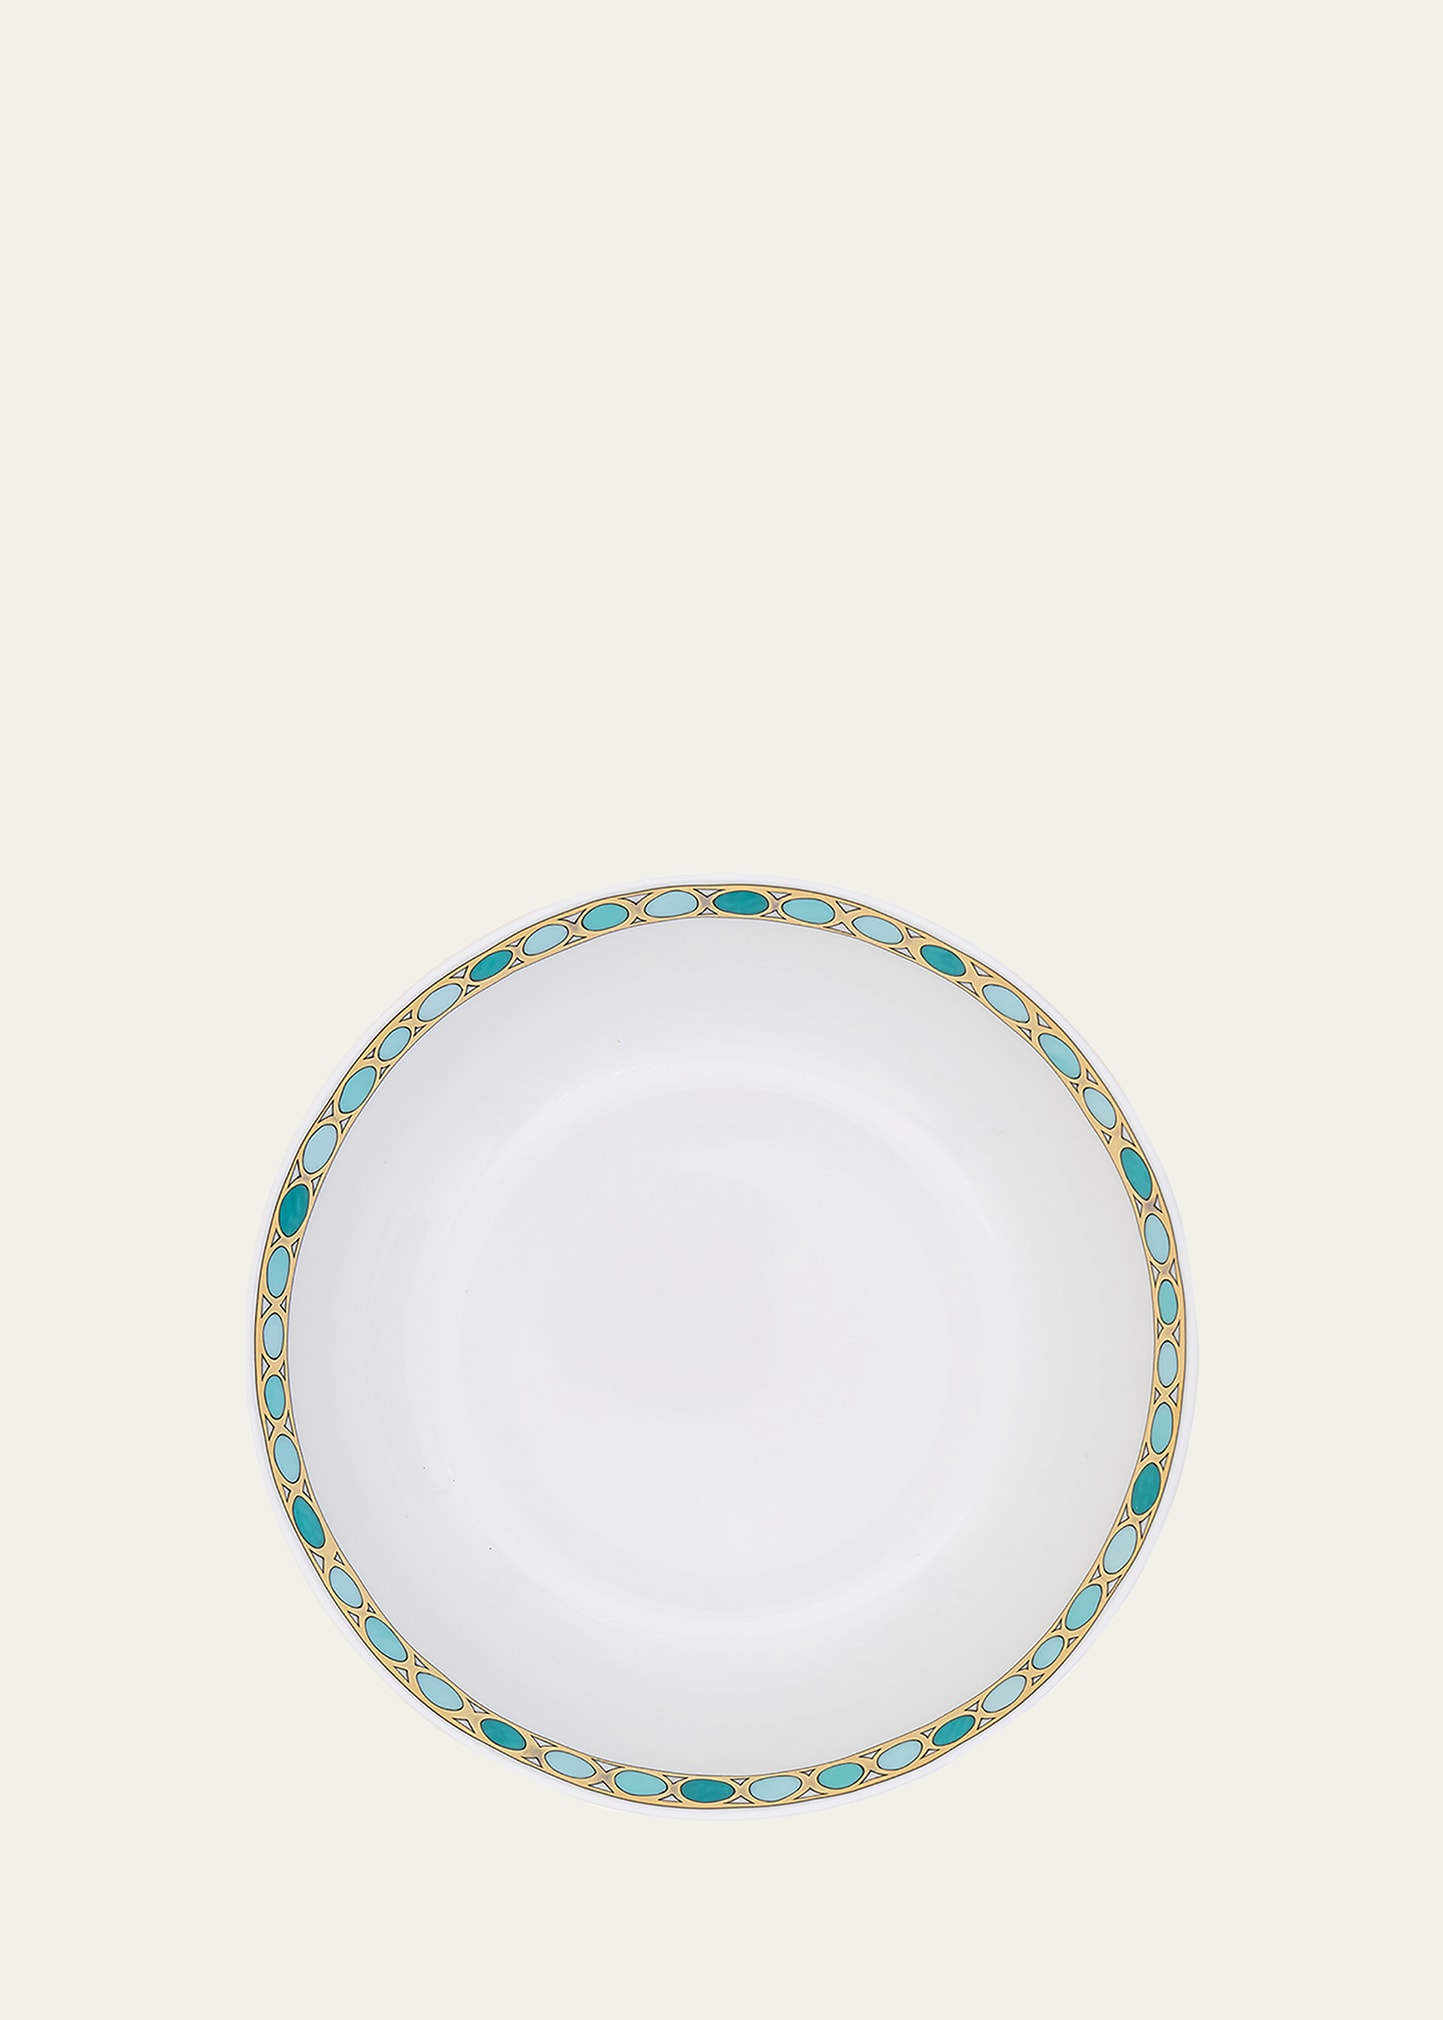 Haviland & Parlon Syracuse Turquoise Cereal Bowl In Multi